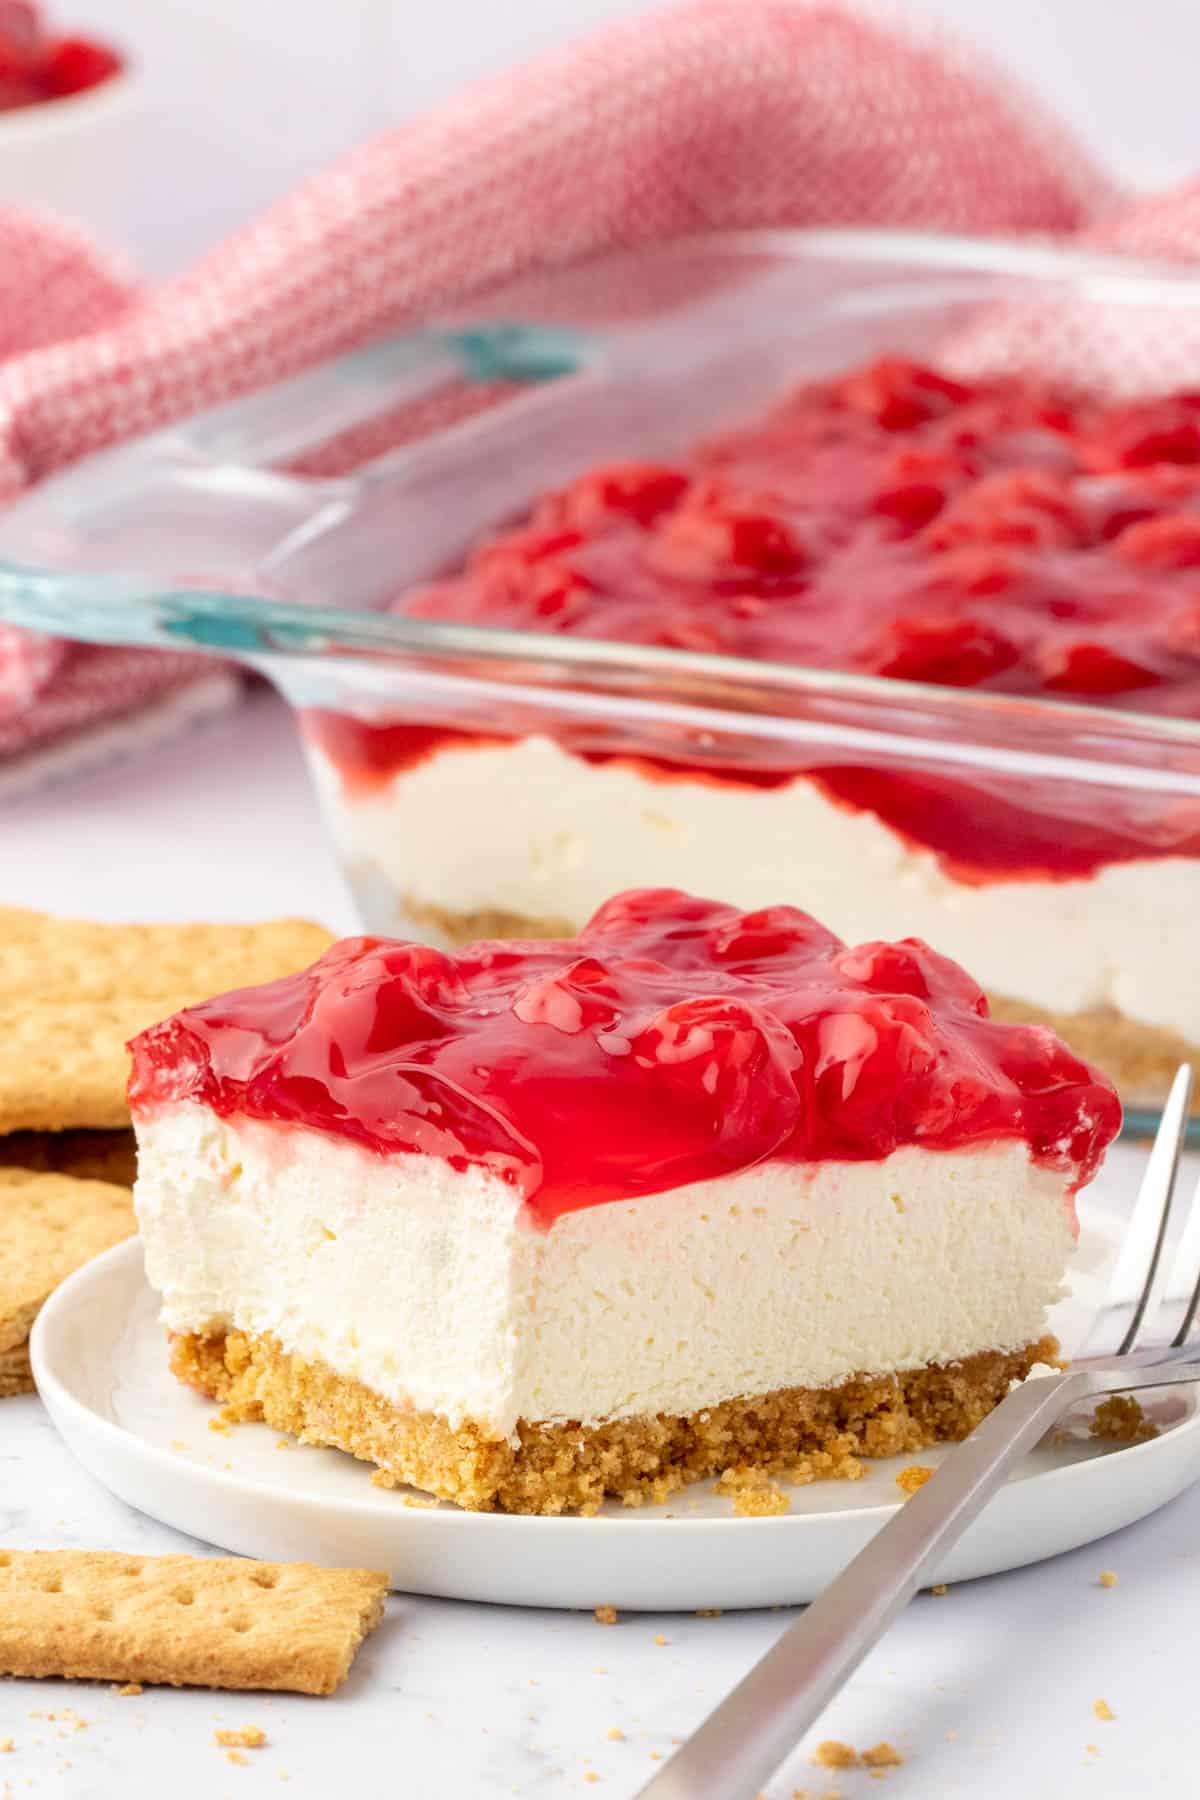 a slice of cherry delight on a white plate with a fork surrounded by graham crackers with a dish full of cherry delight and a red and white towel in the background